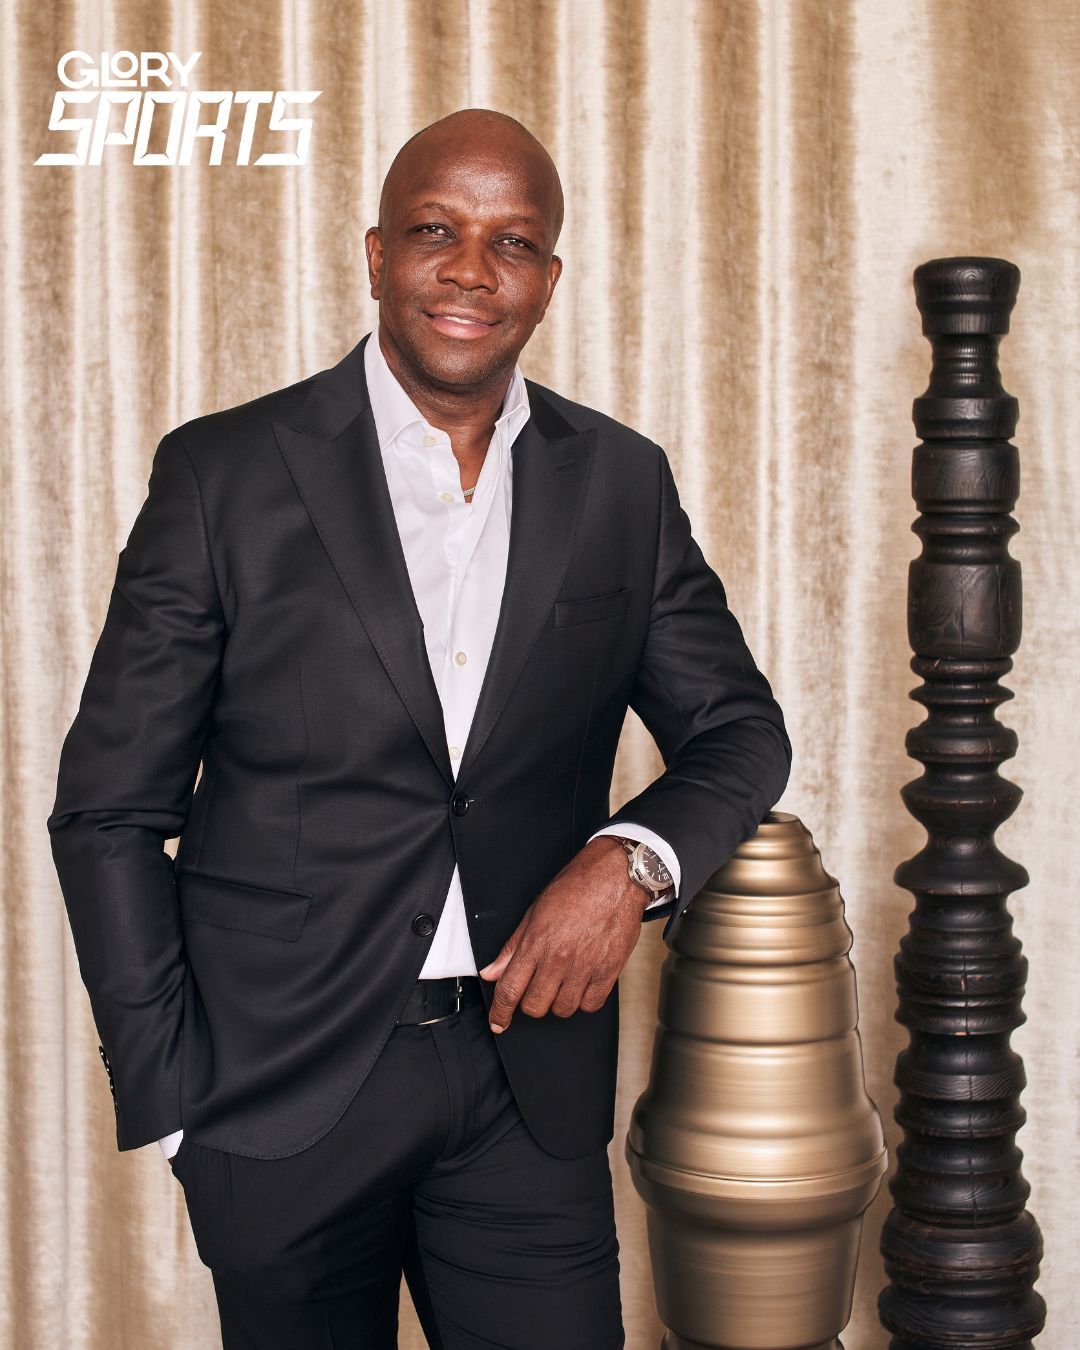 Donovan Bailey wearing a black suit and unbuttoned white dress shirt. He is smiling and leaning on a decorative plinth against gold curtains.